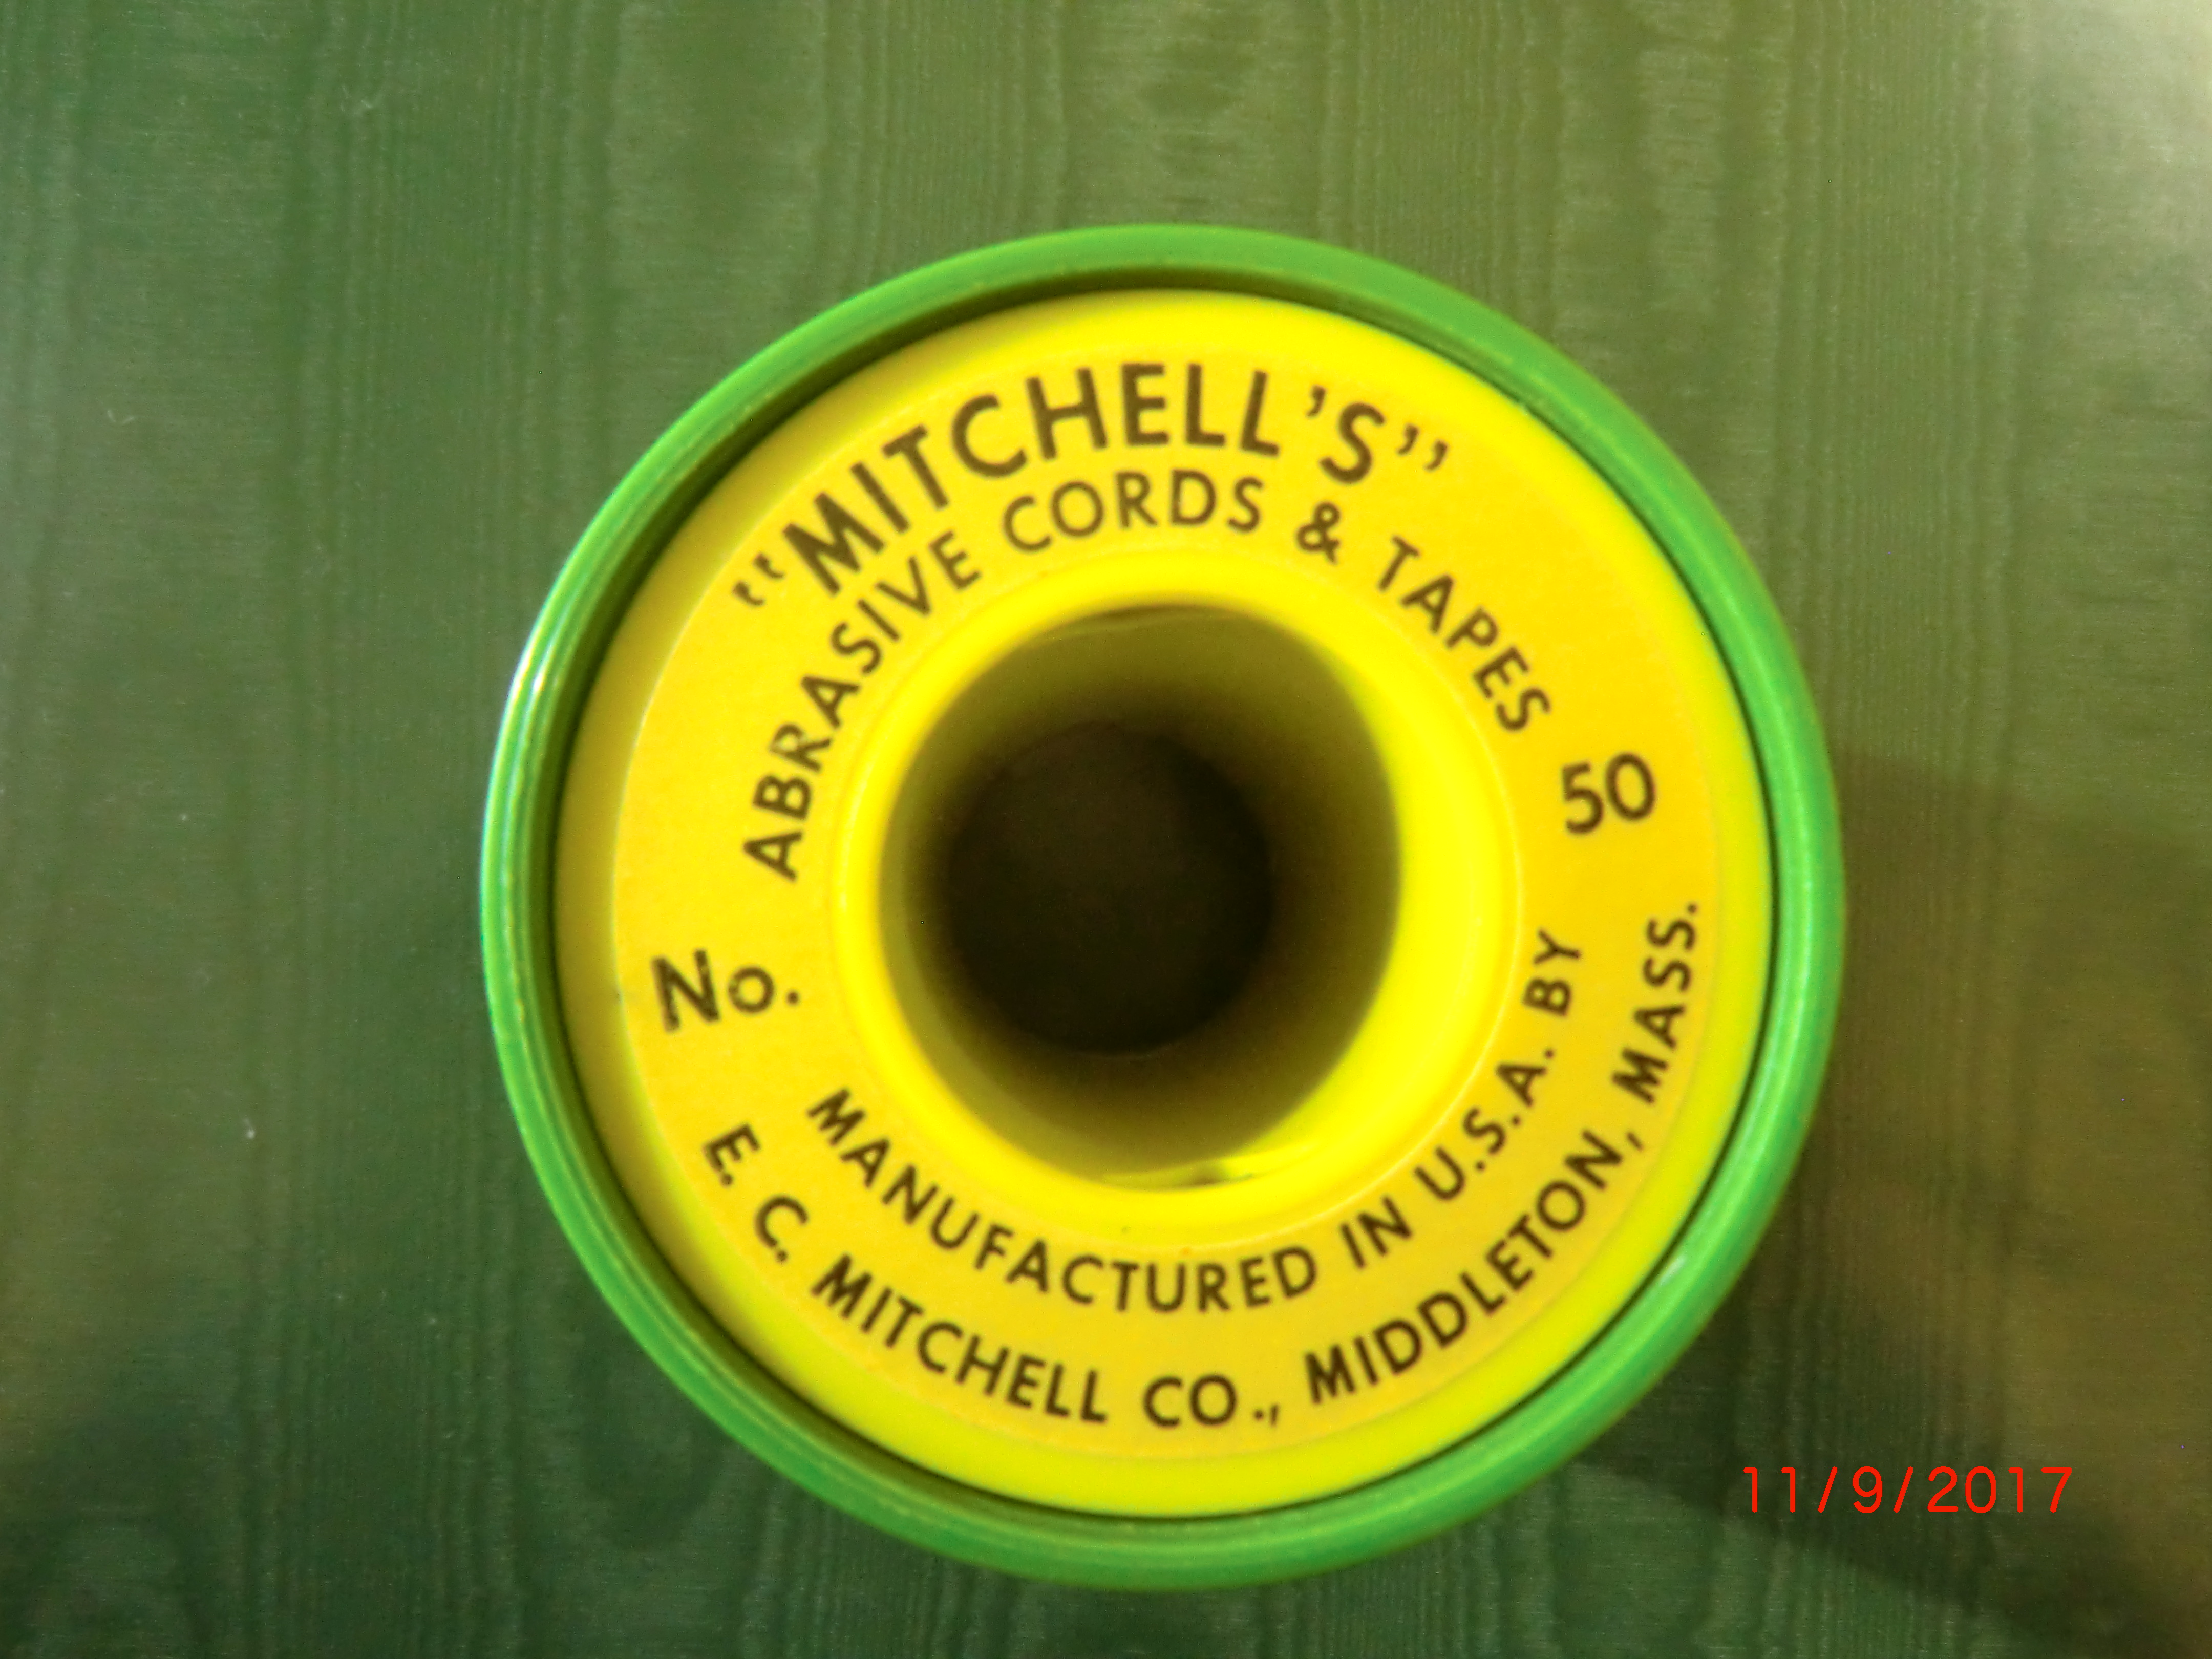 Mitchell #58 Woodworking 3/16 x 50 Feet Med Grit Cutting Sanding Cord 19497 